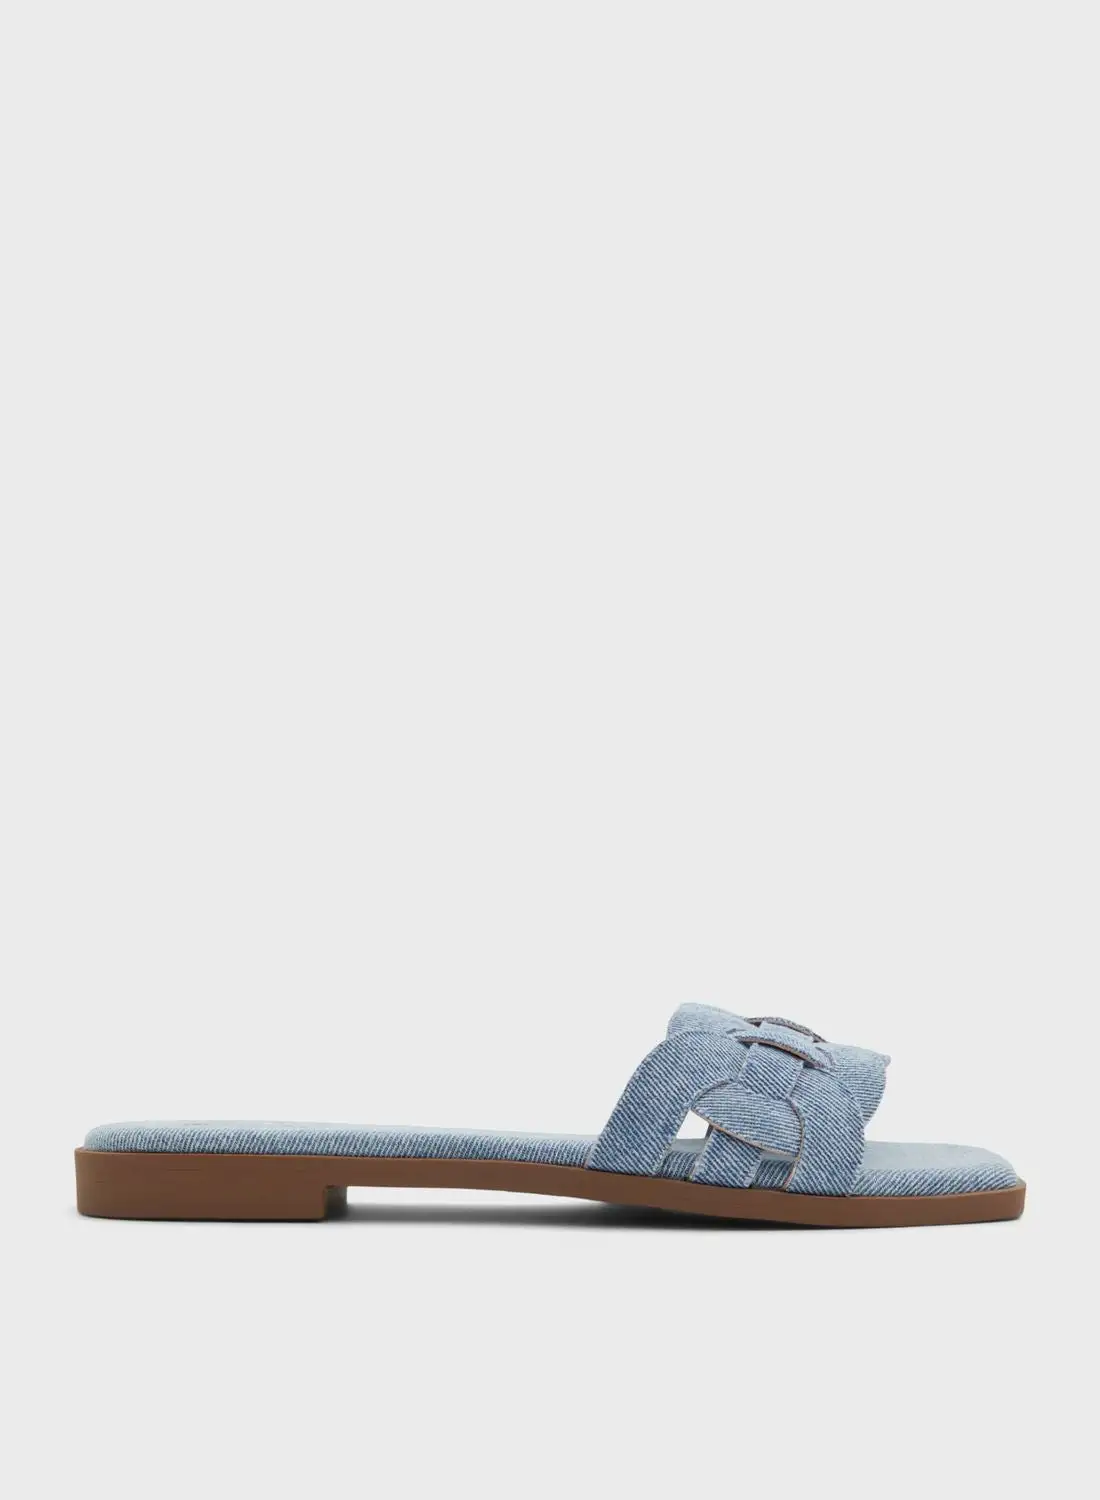 CALL IT SPRING Melina Flat Sandals